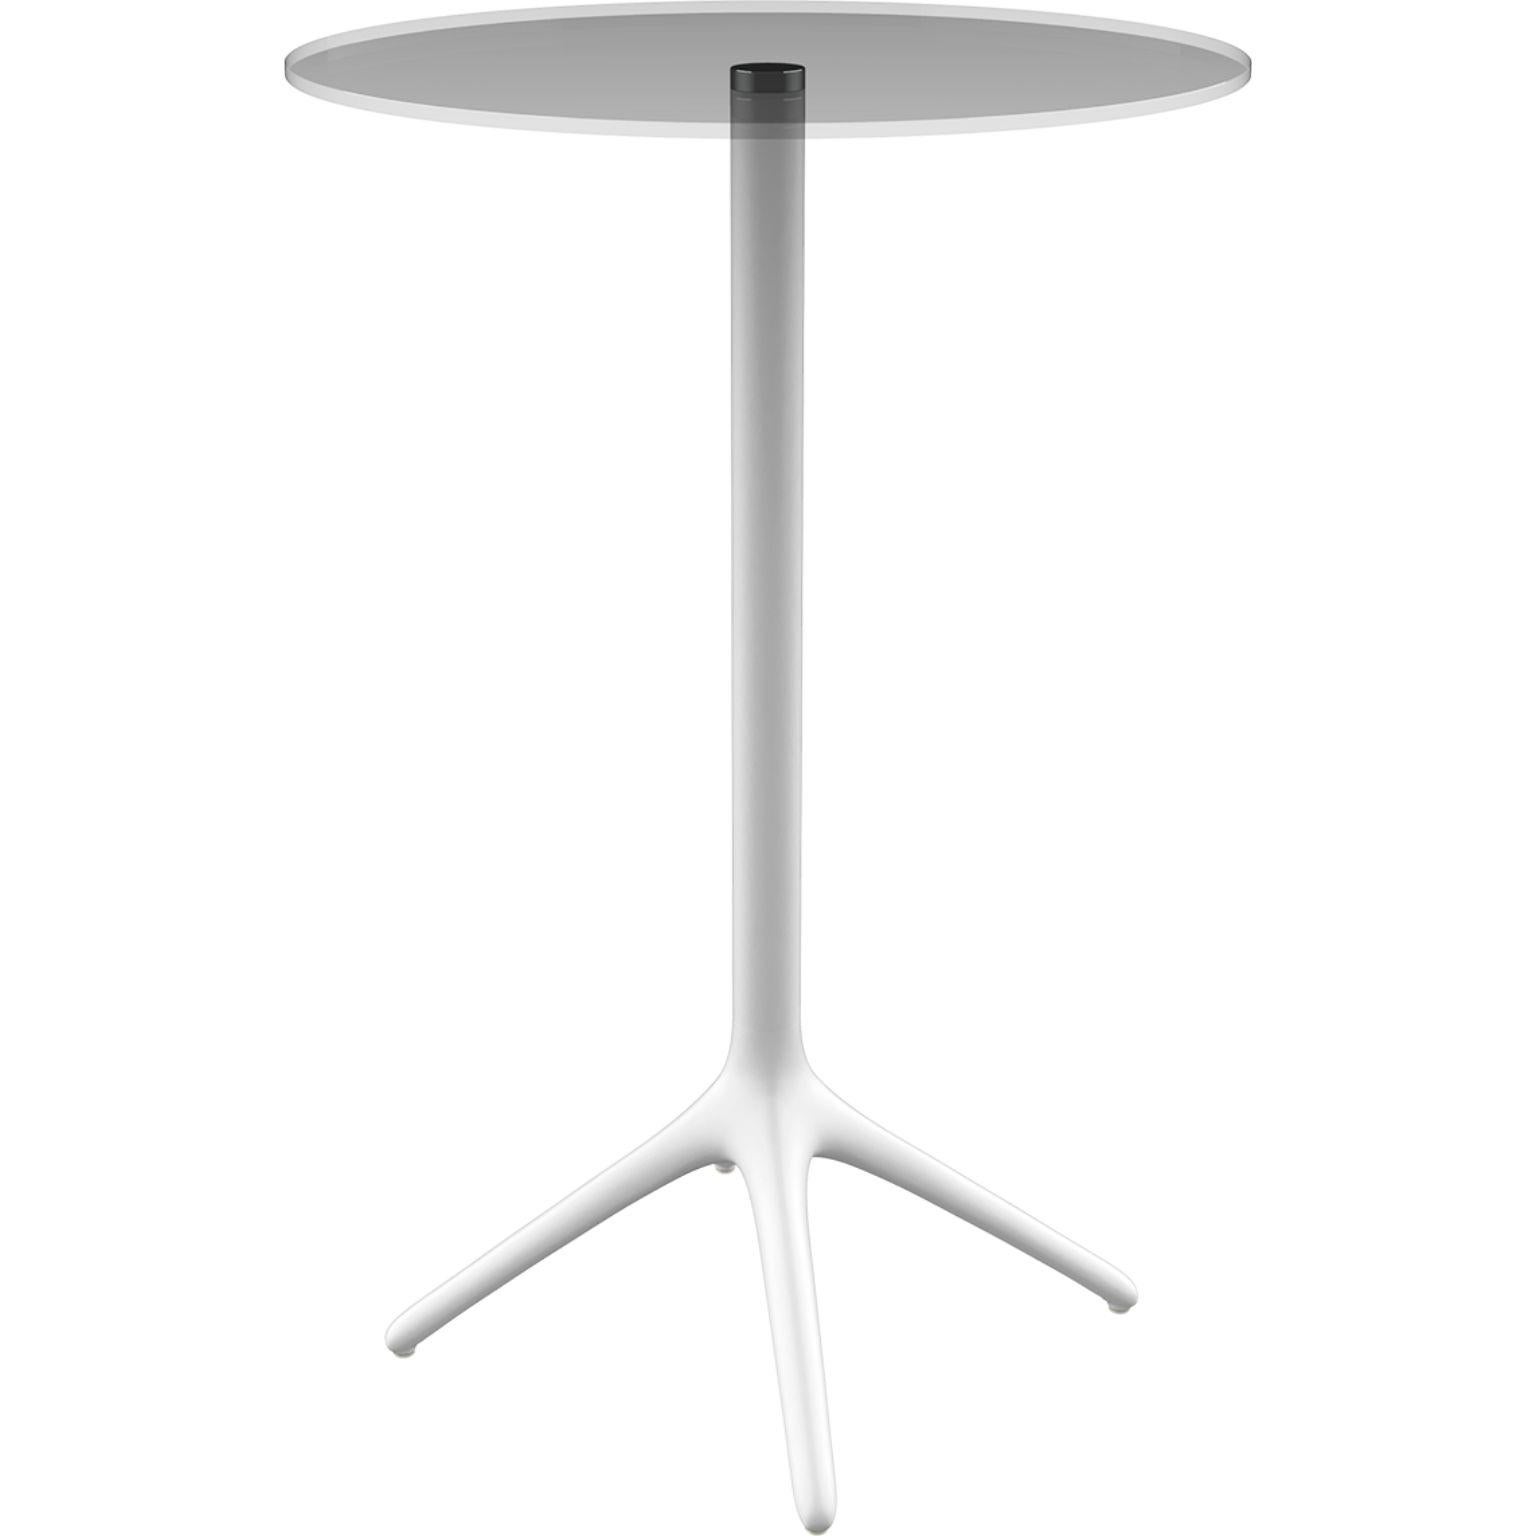 Uni white table 105 by Mowee.
Dimensions: D45.5 x H105 cm.
Material: Aluminium, tempered glass.
Weight: 6.2 kg.
Also Available in different colours and finishes. Collapsable version available. 

A table designed to be as versatile as possible